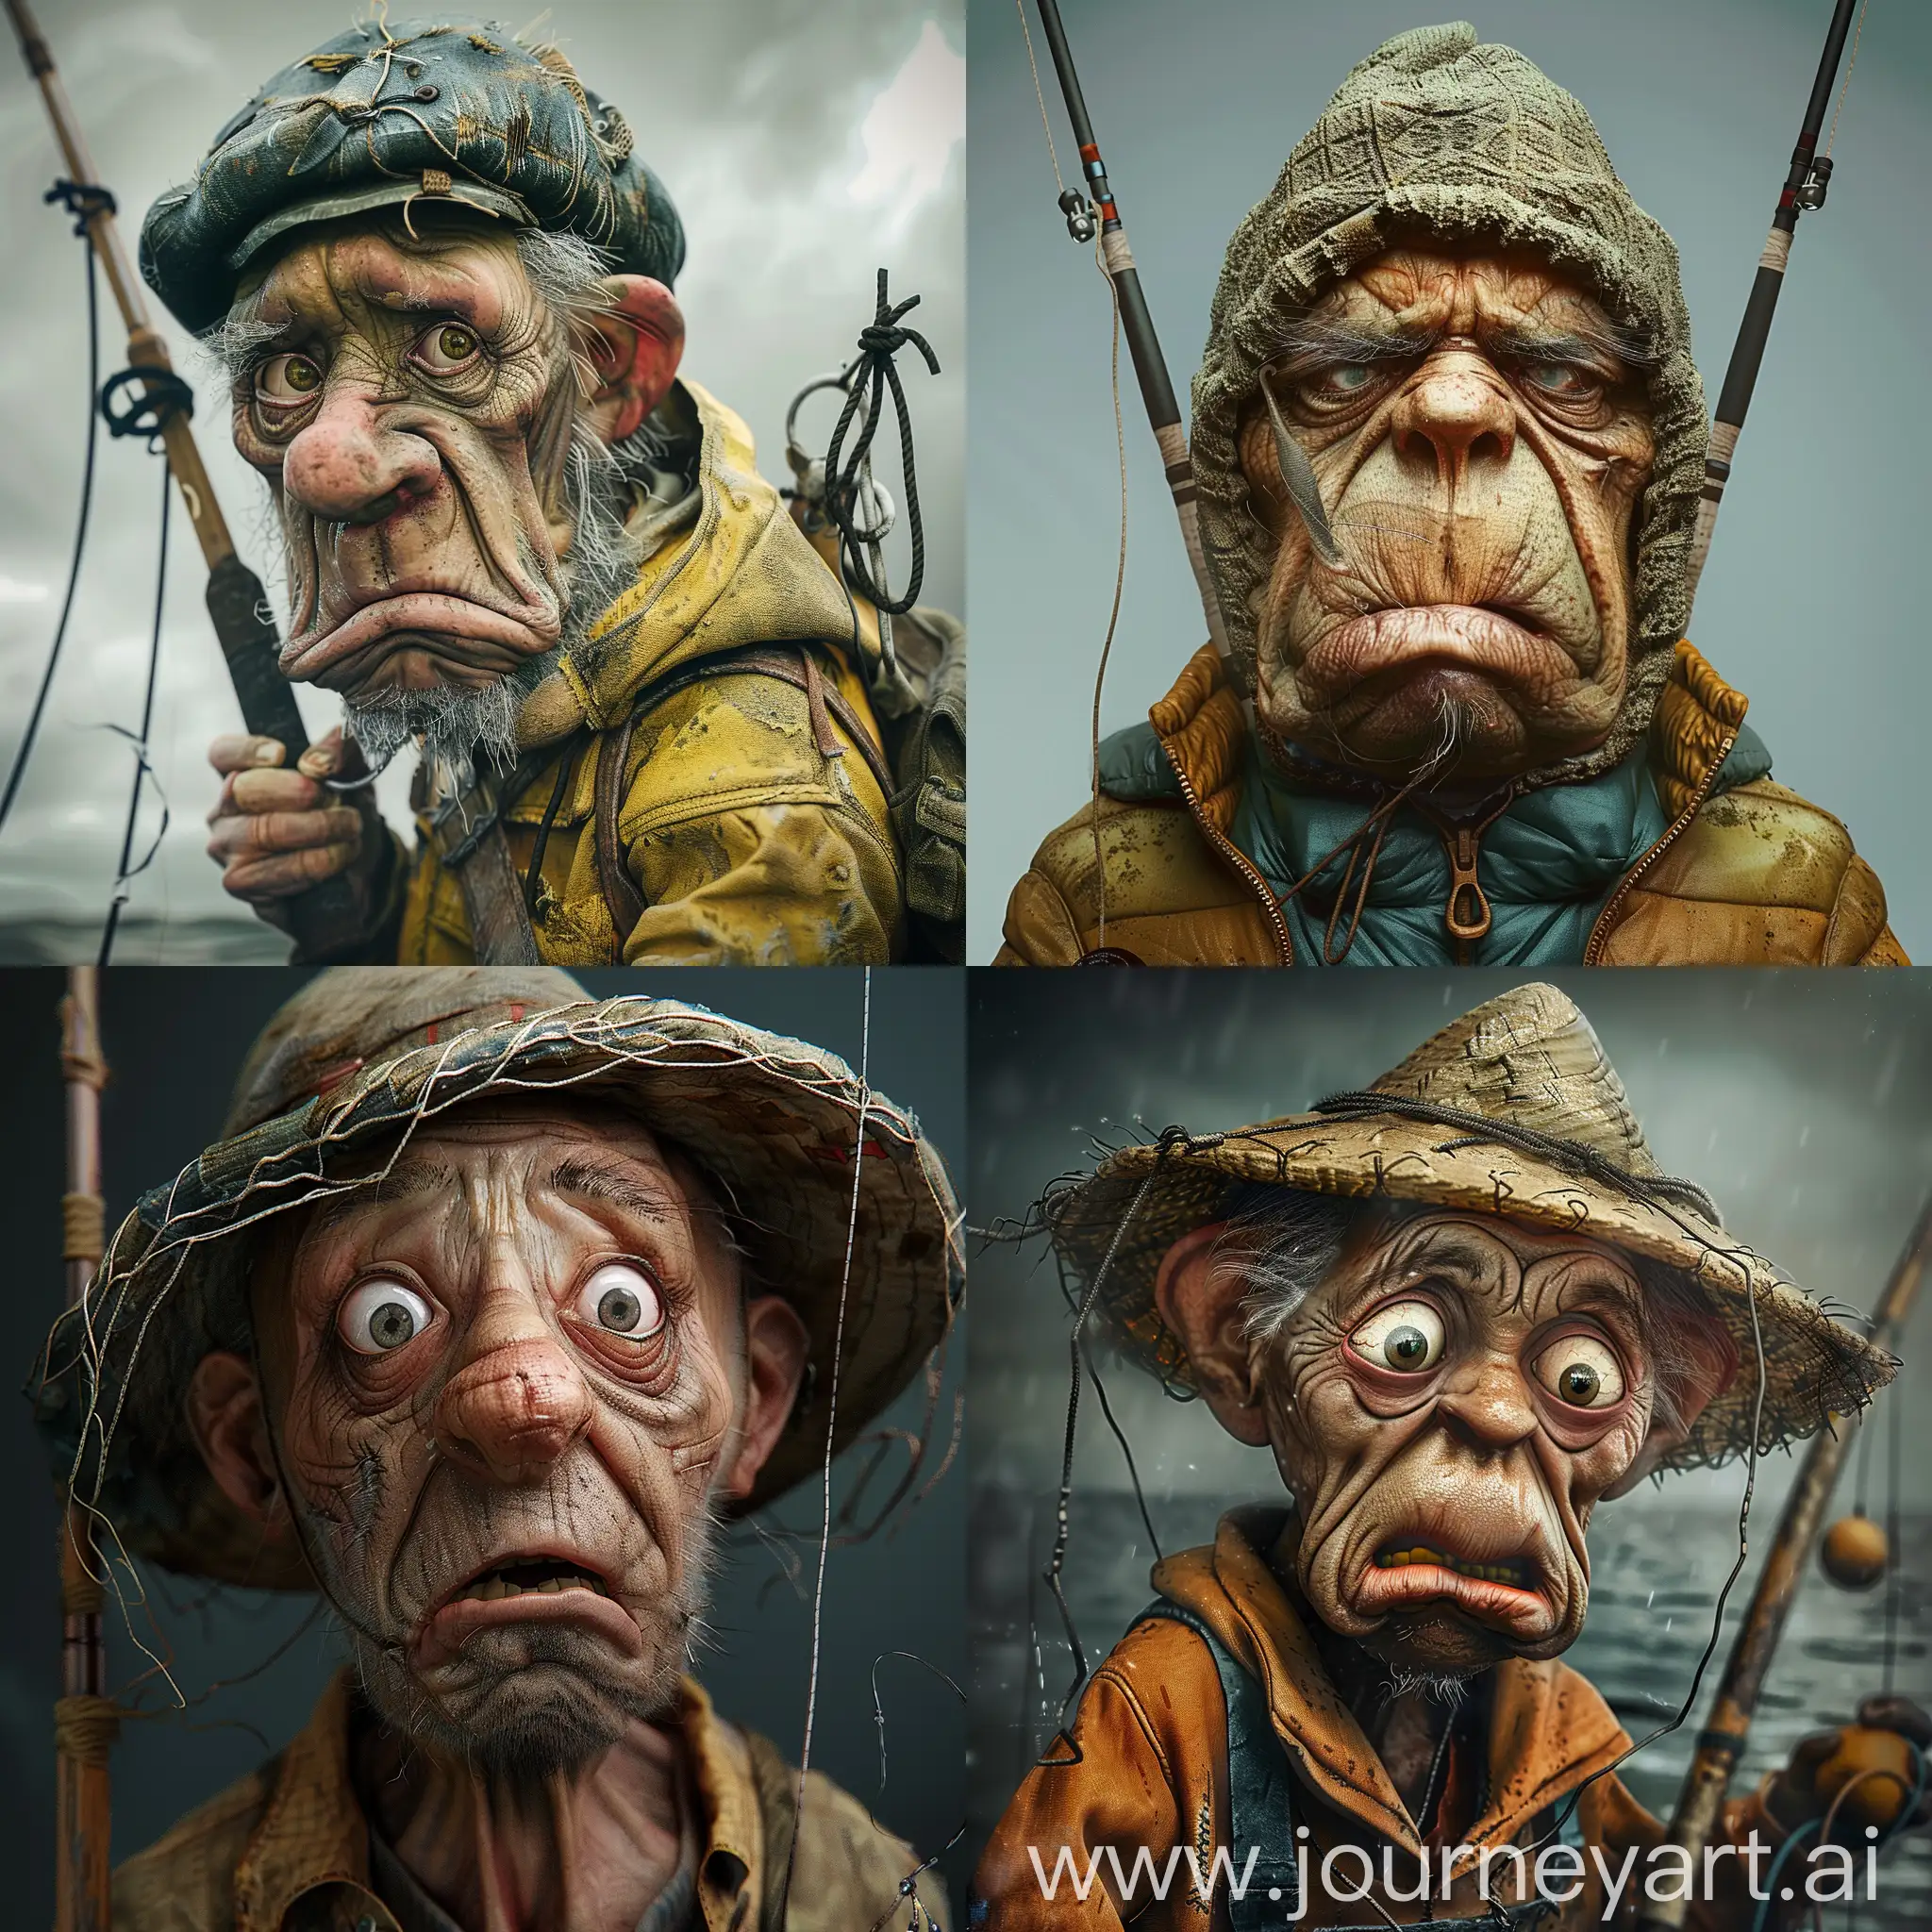 photorealistic image of a fisherman with a dumb face